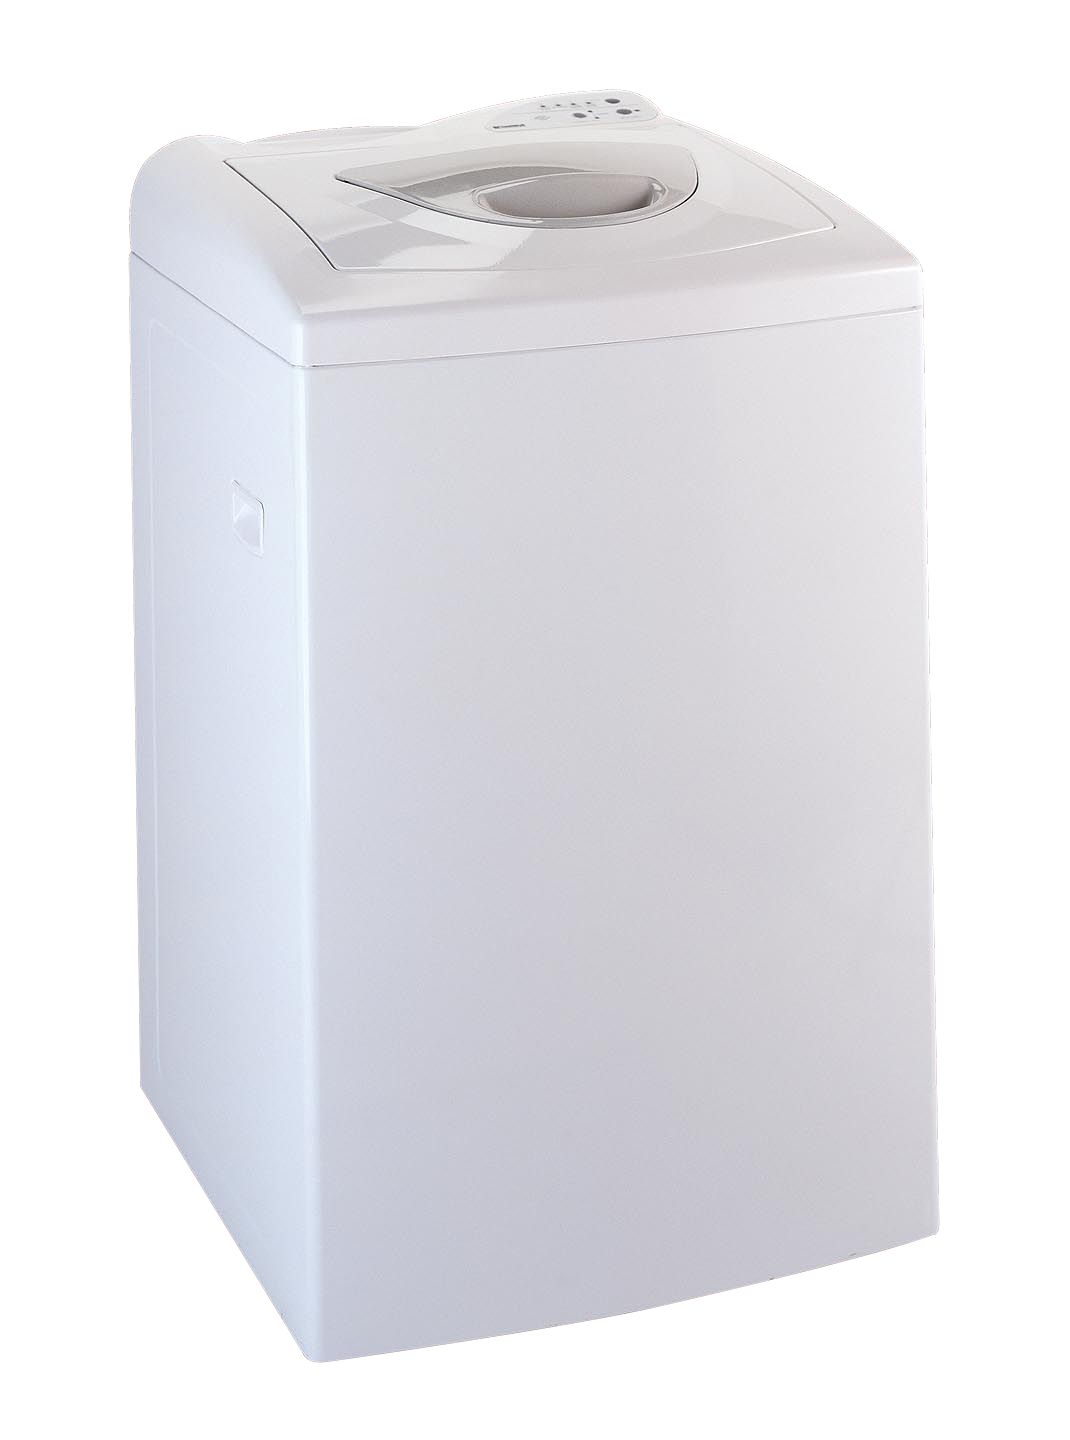 Kenmore 2.1 cu. ft. Compact Portable Top-Load Washing Machine White Less than 4 cu. ft.